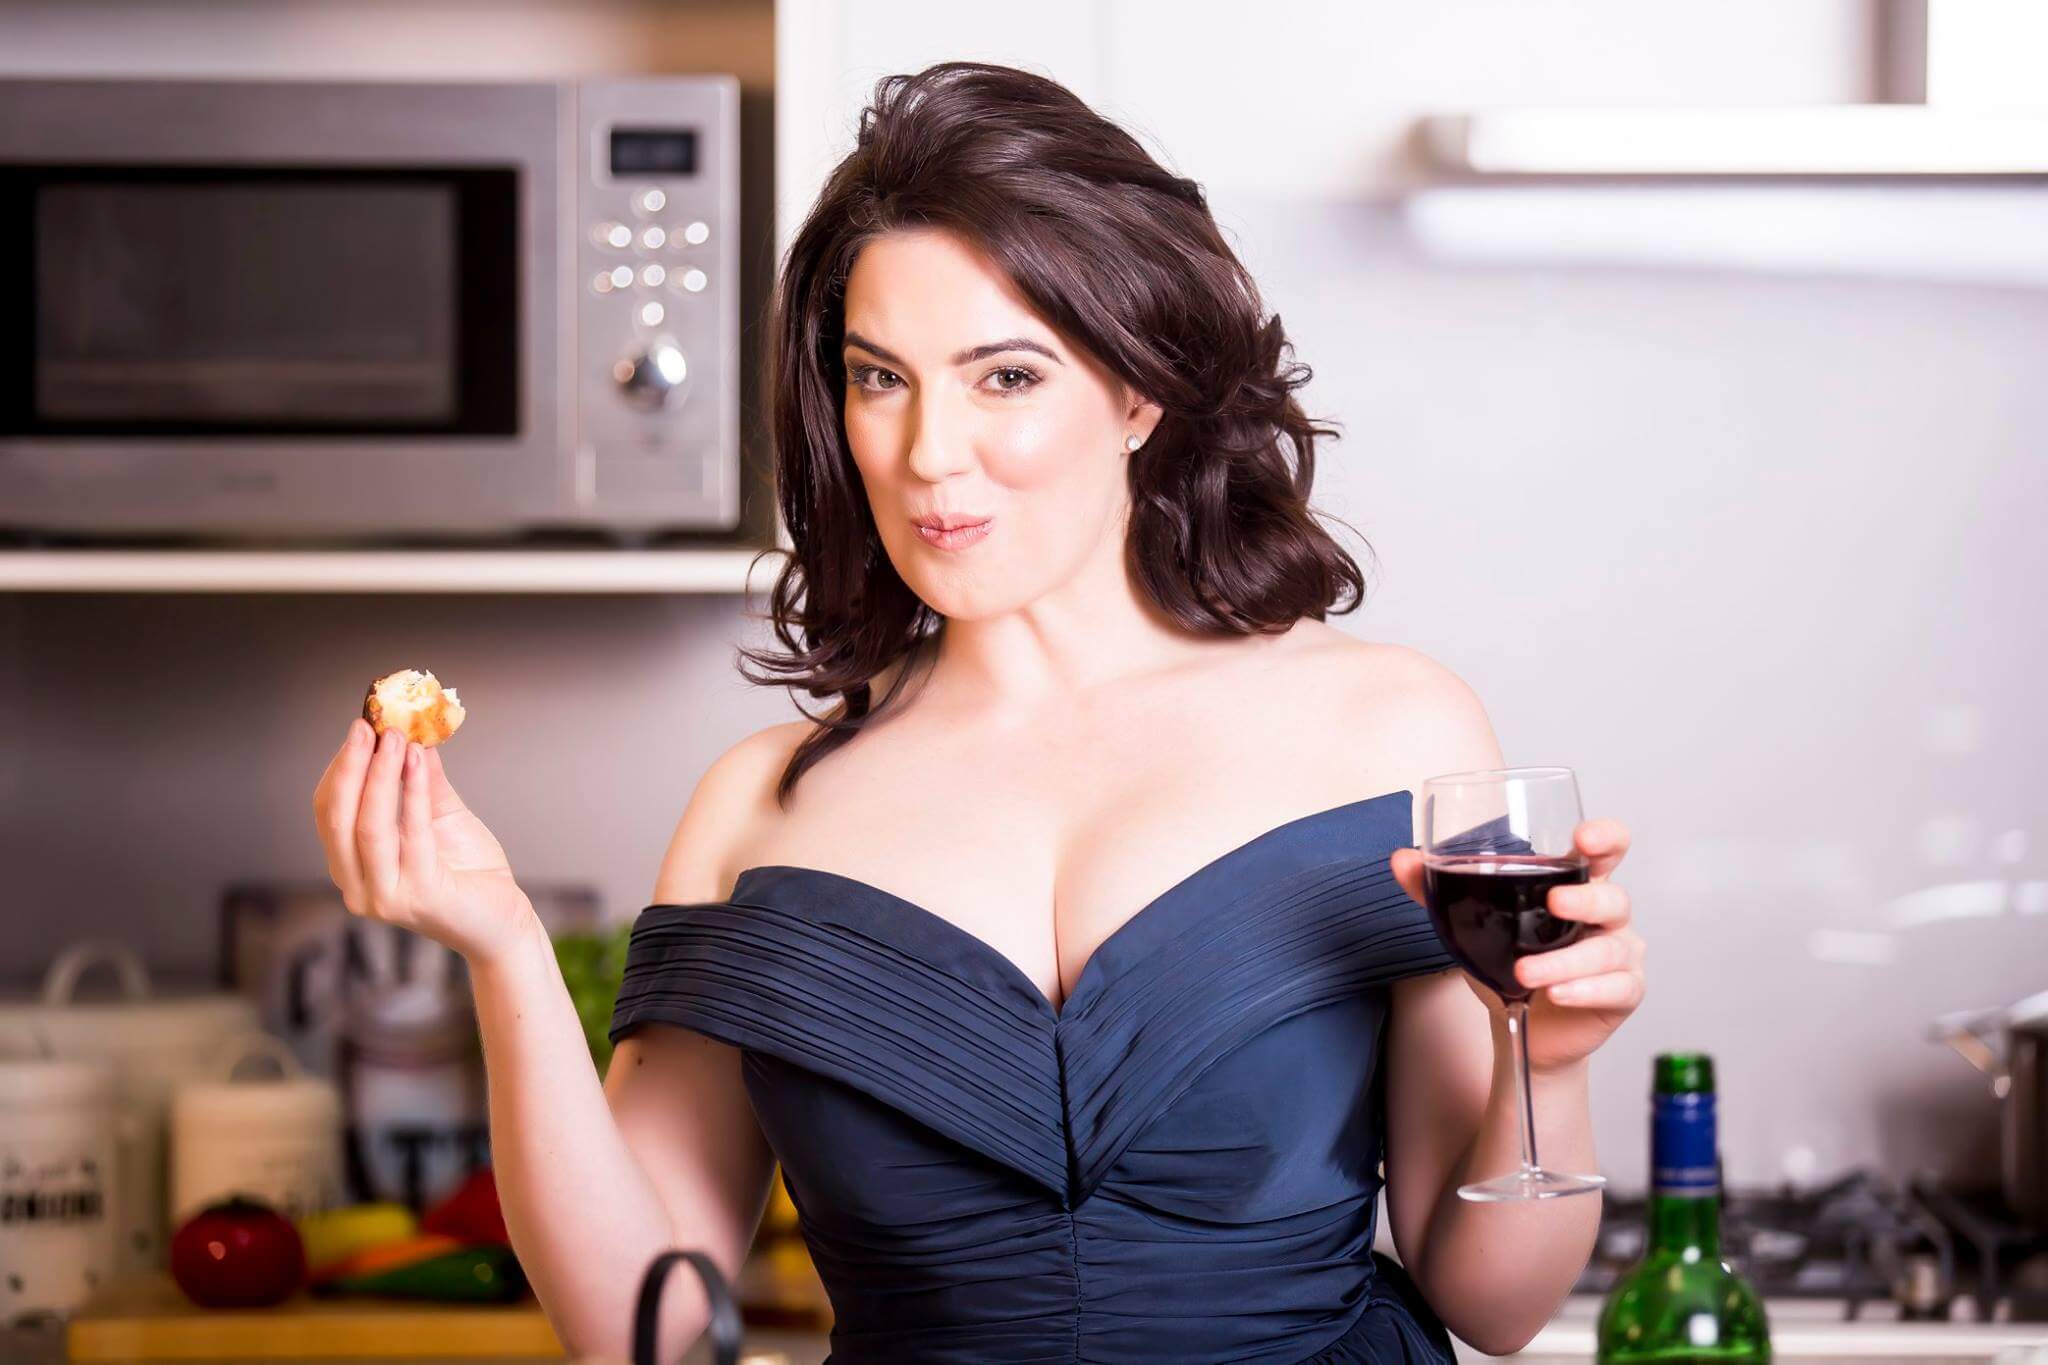 In this section, enjoy our galleria of Nigella Lawson near-nude pictures as...